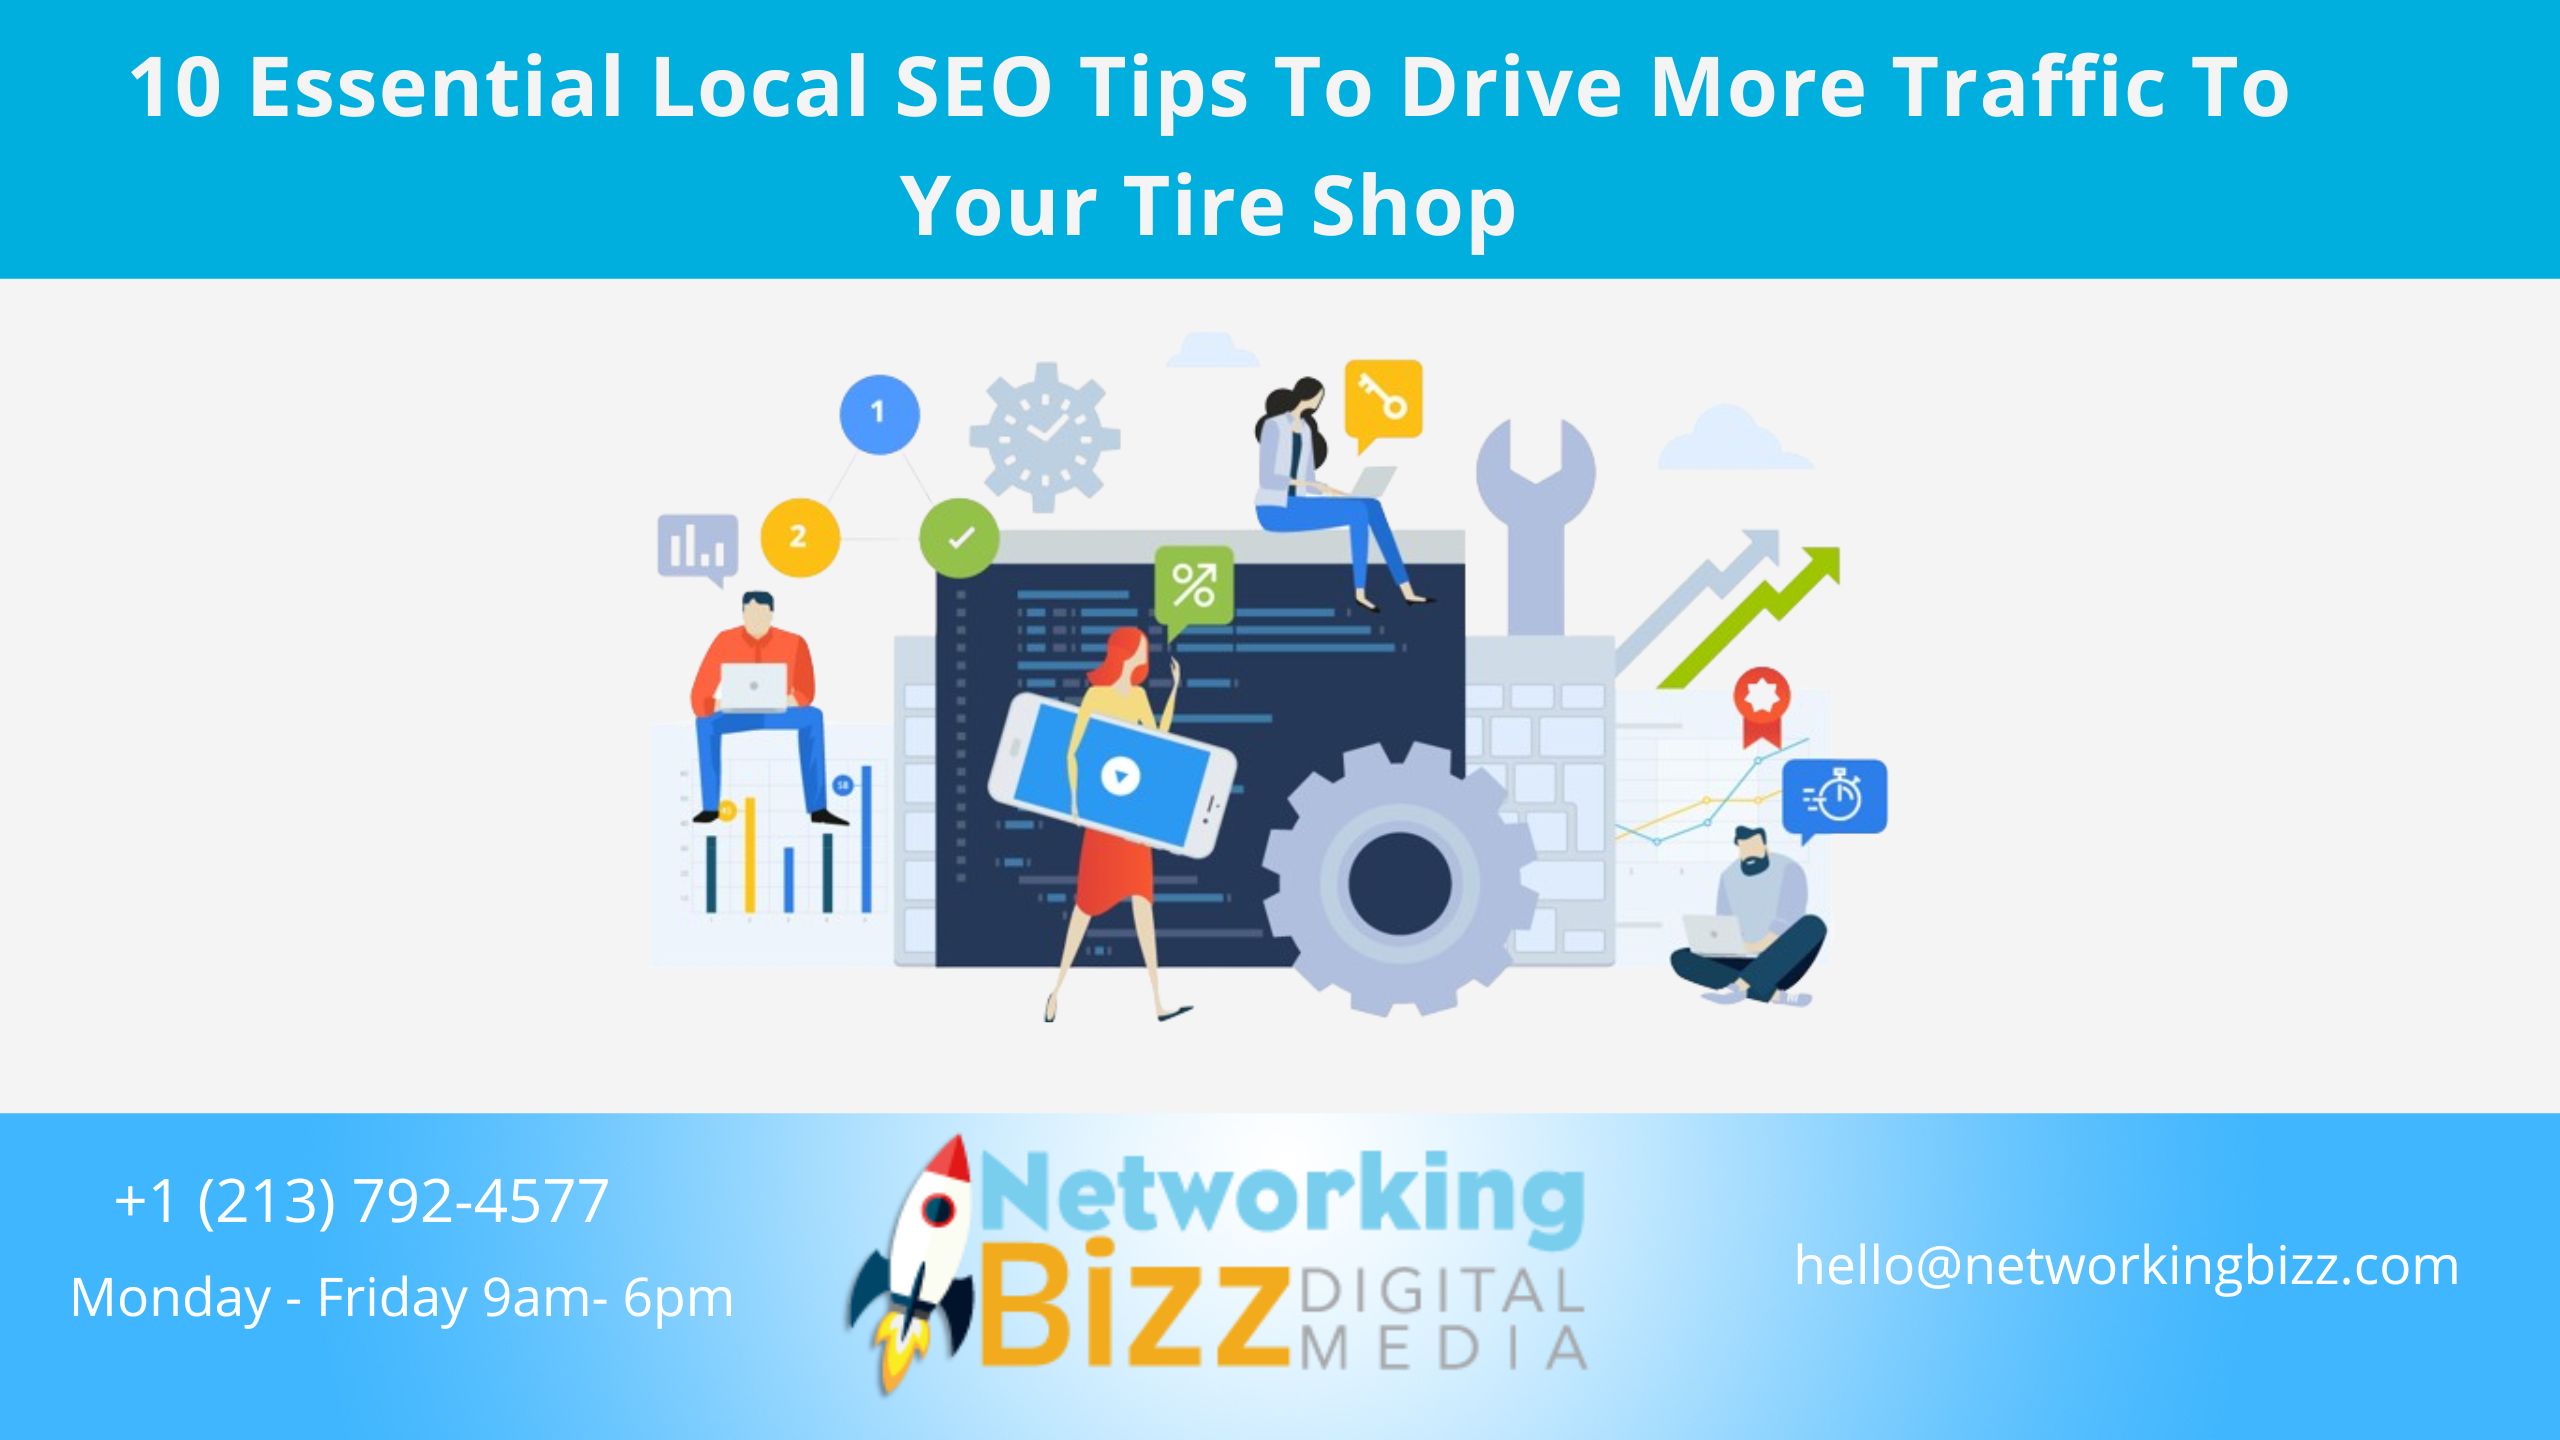 10 Essential Local SEO Tips To Drive More Traffic To Your Tire Shop